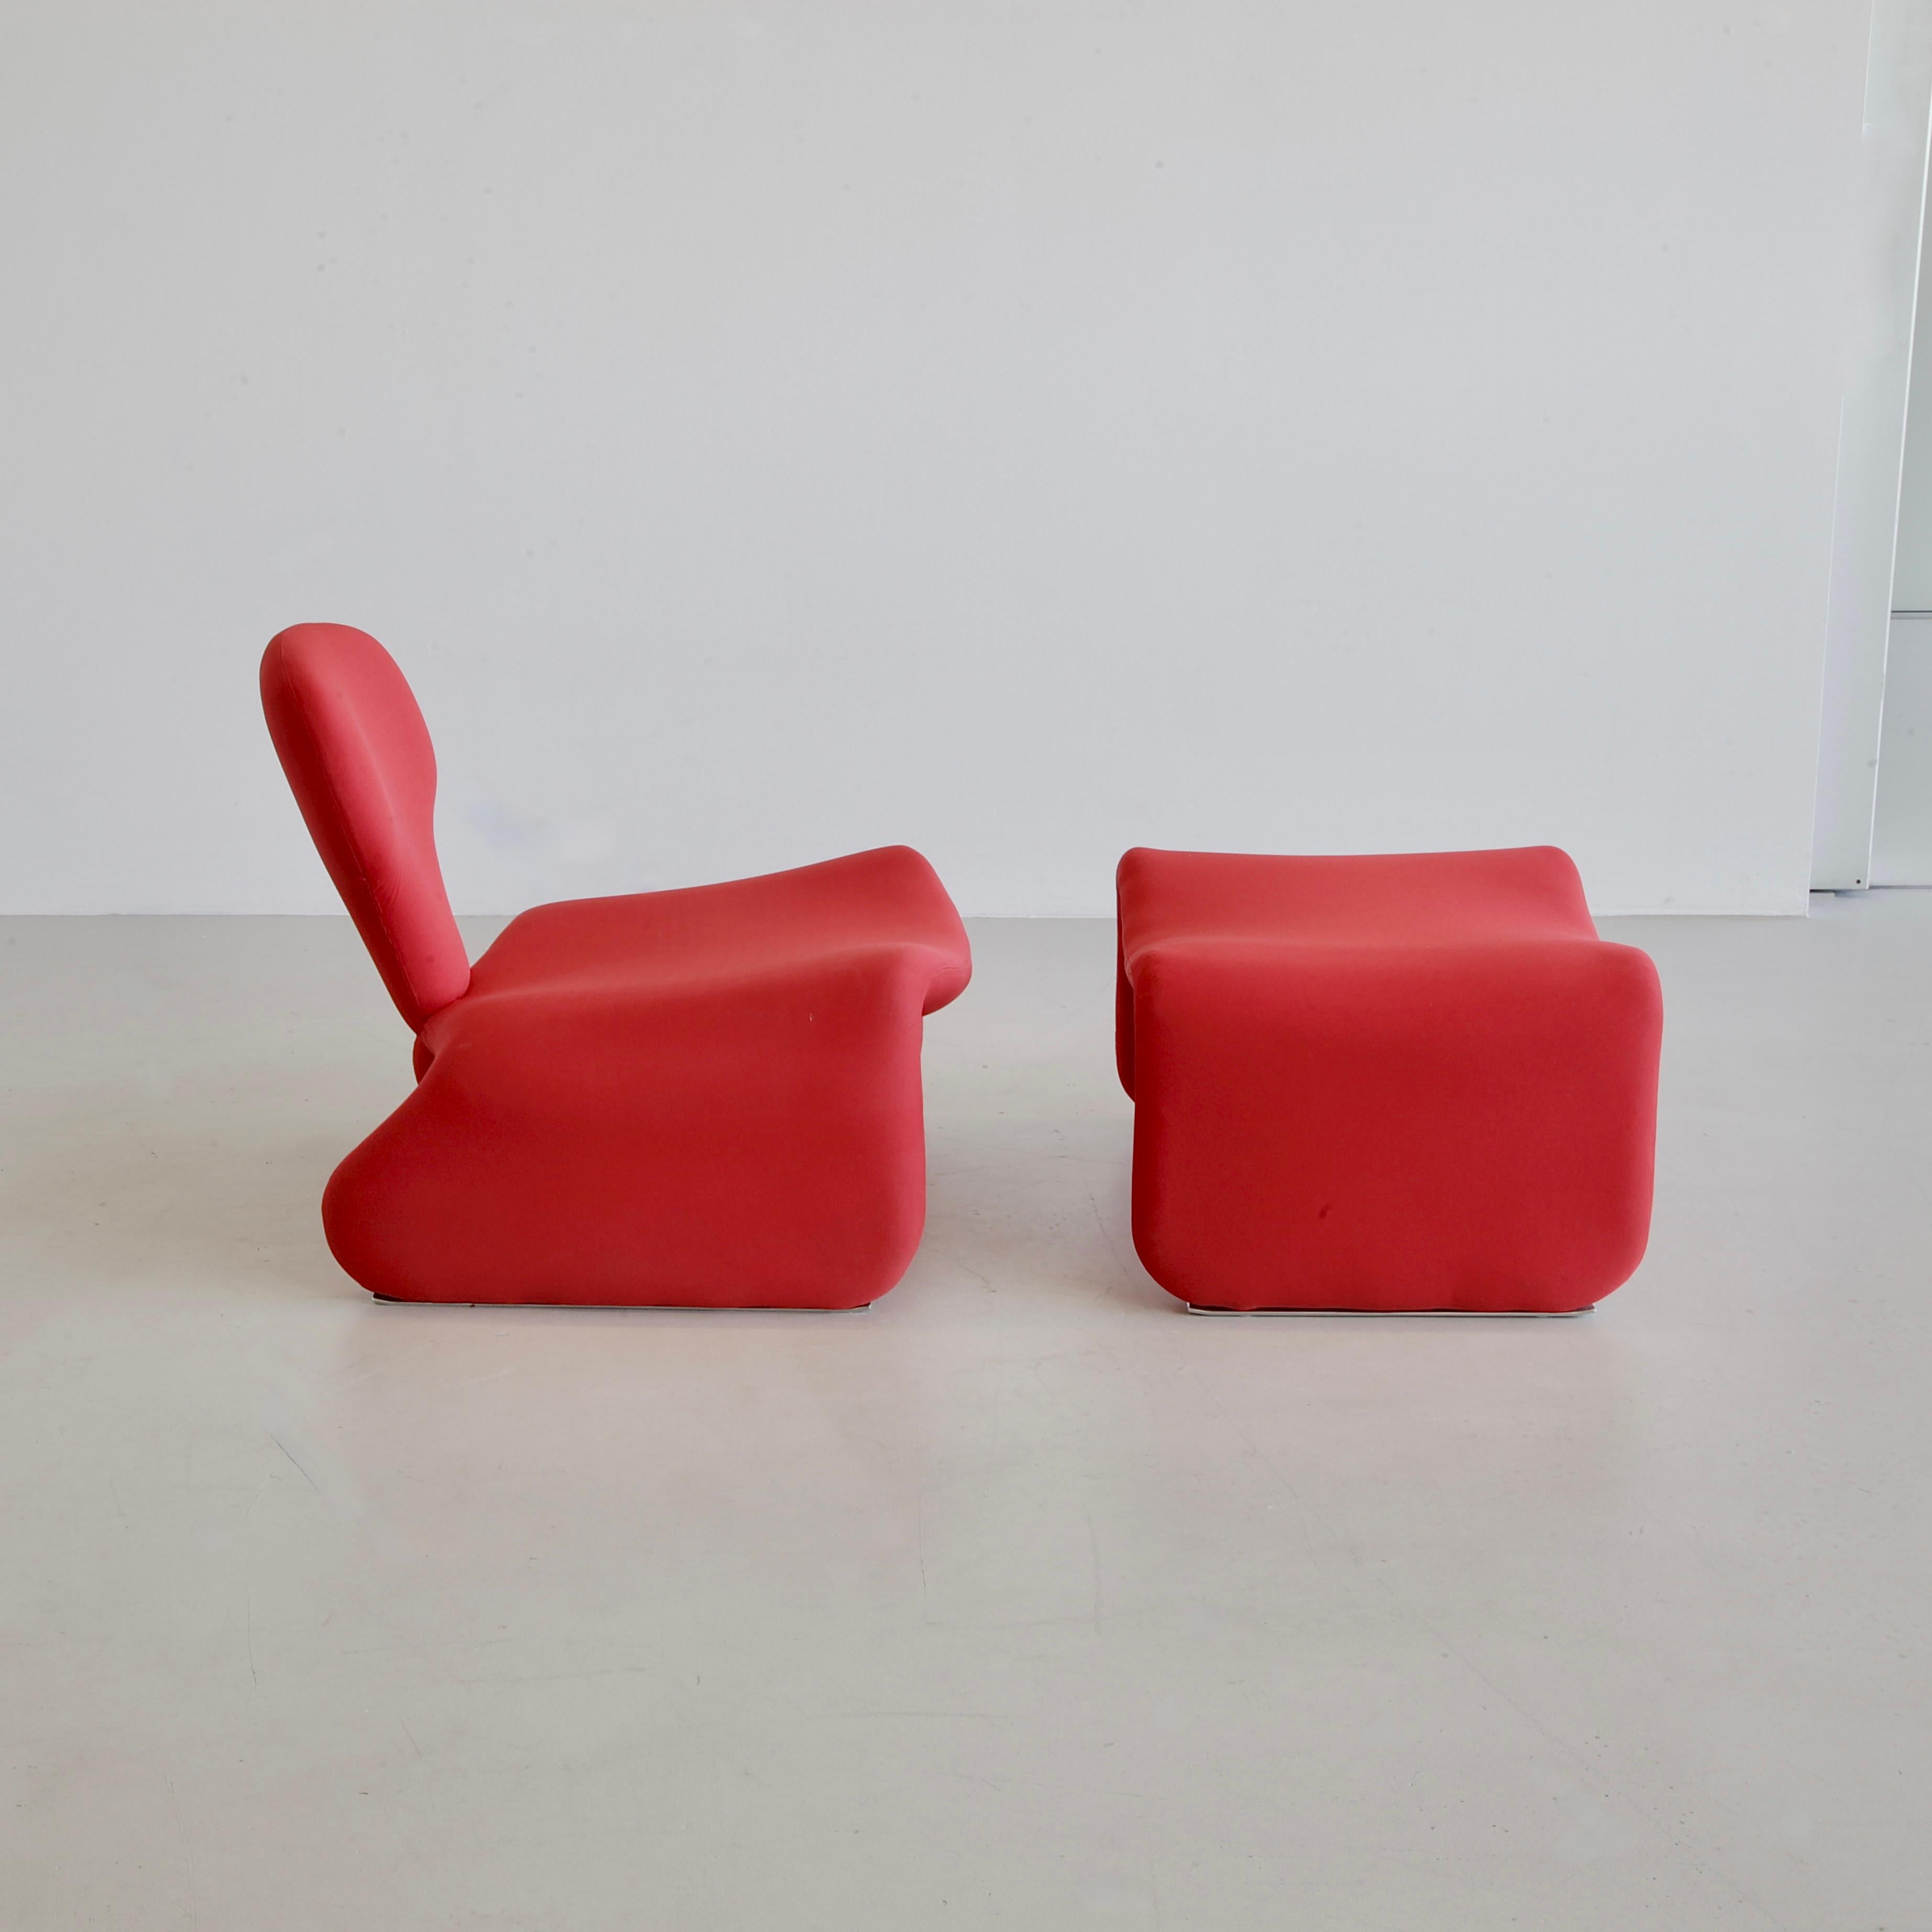 French Dijnn Chair and Footstool, Designed by Olivier Mourgue, France, Airborne, 1965 For Sale